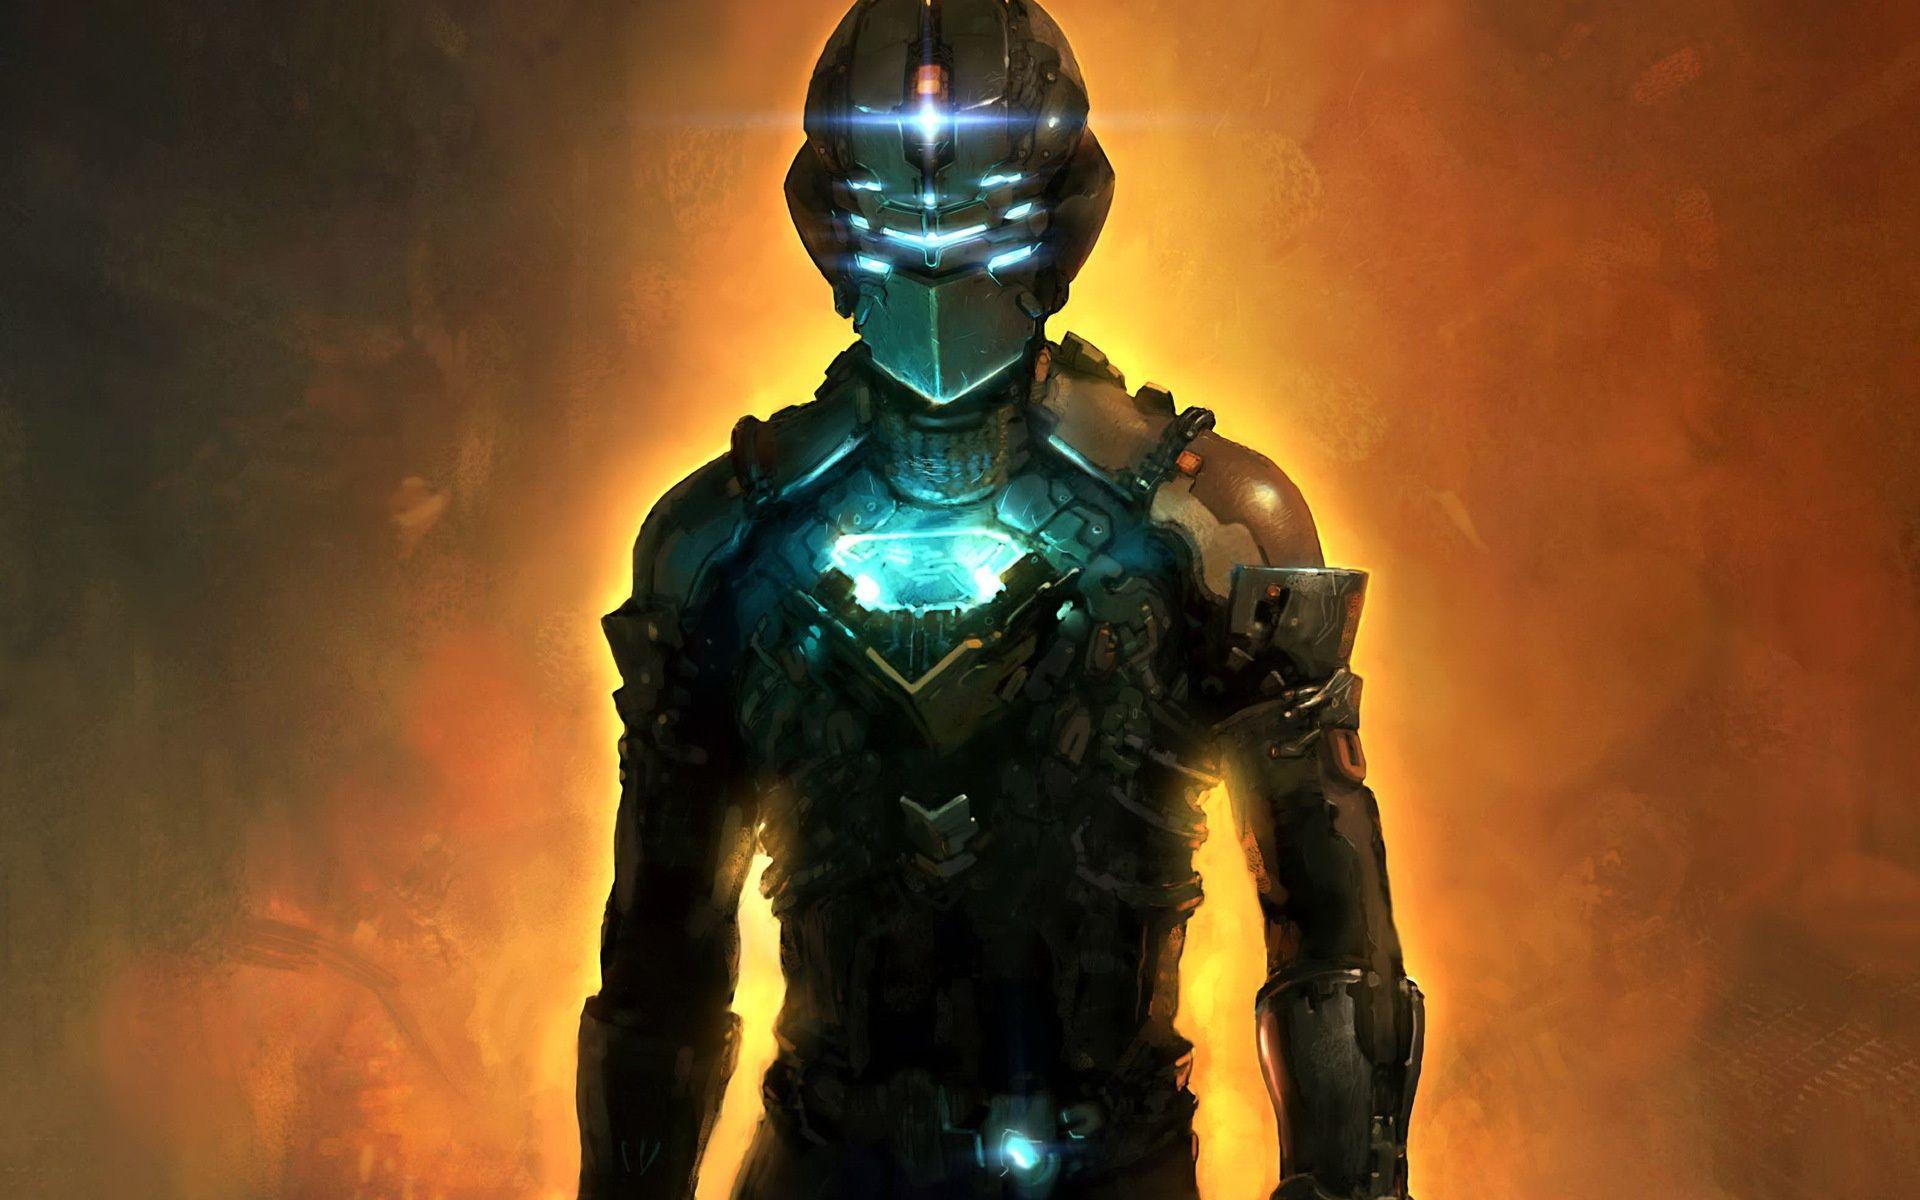 download free dead space 2 remake